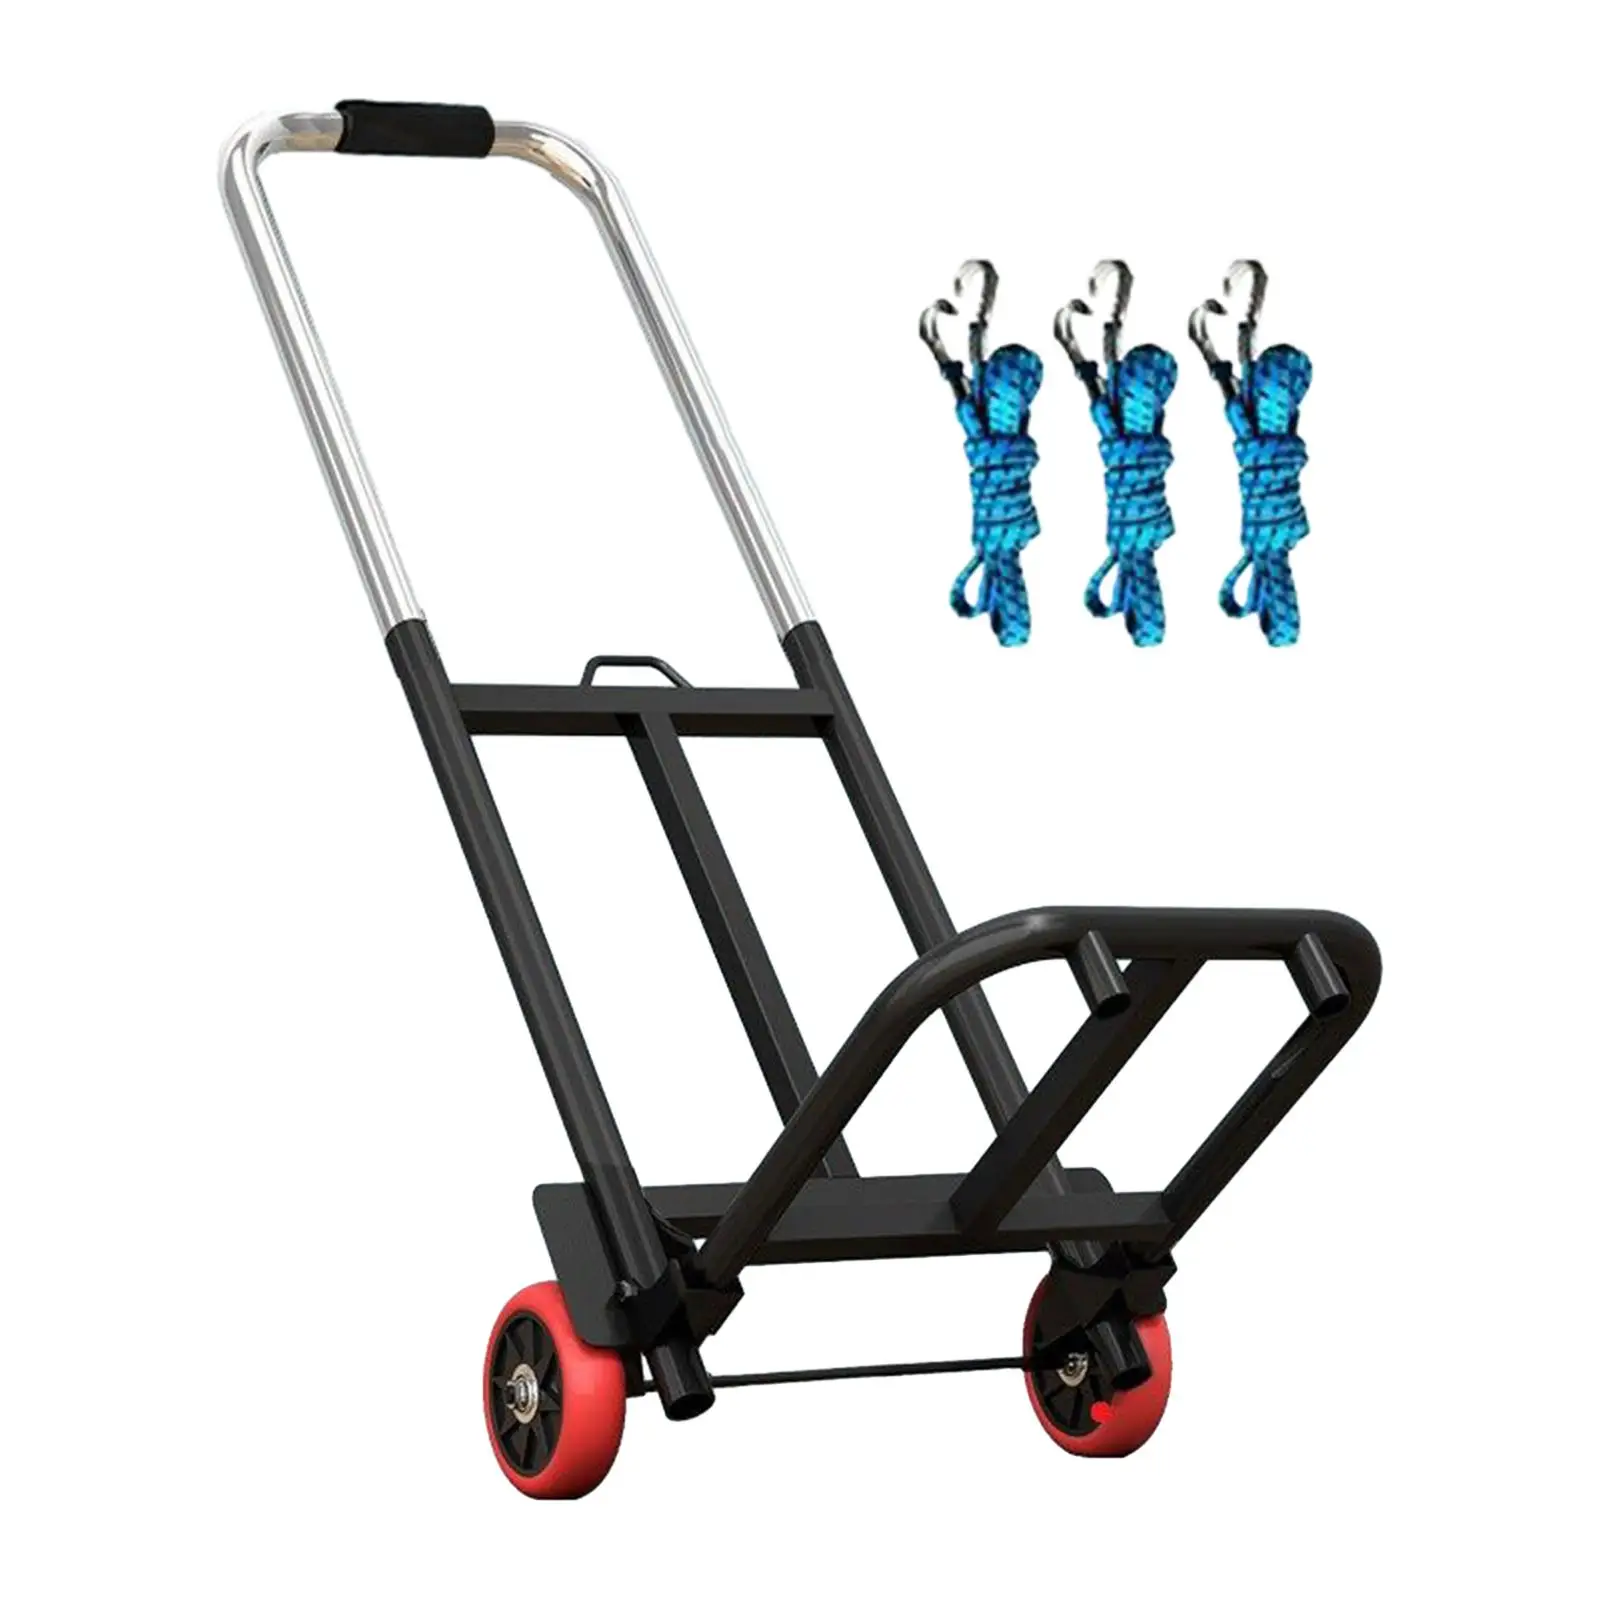 Folding Hand Truck Luggage Trolley Cart with 3 Elastic Ropes for Home Moving